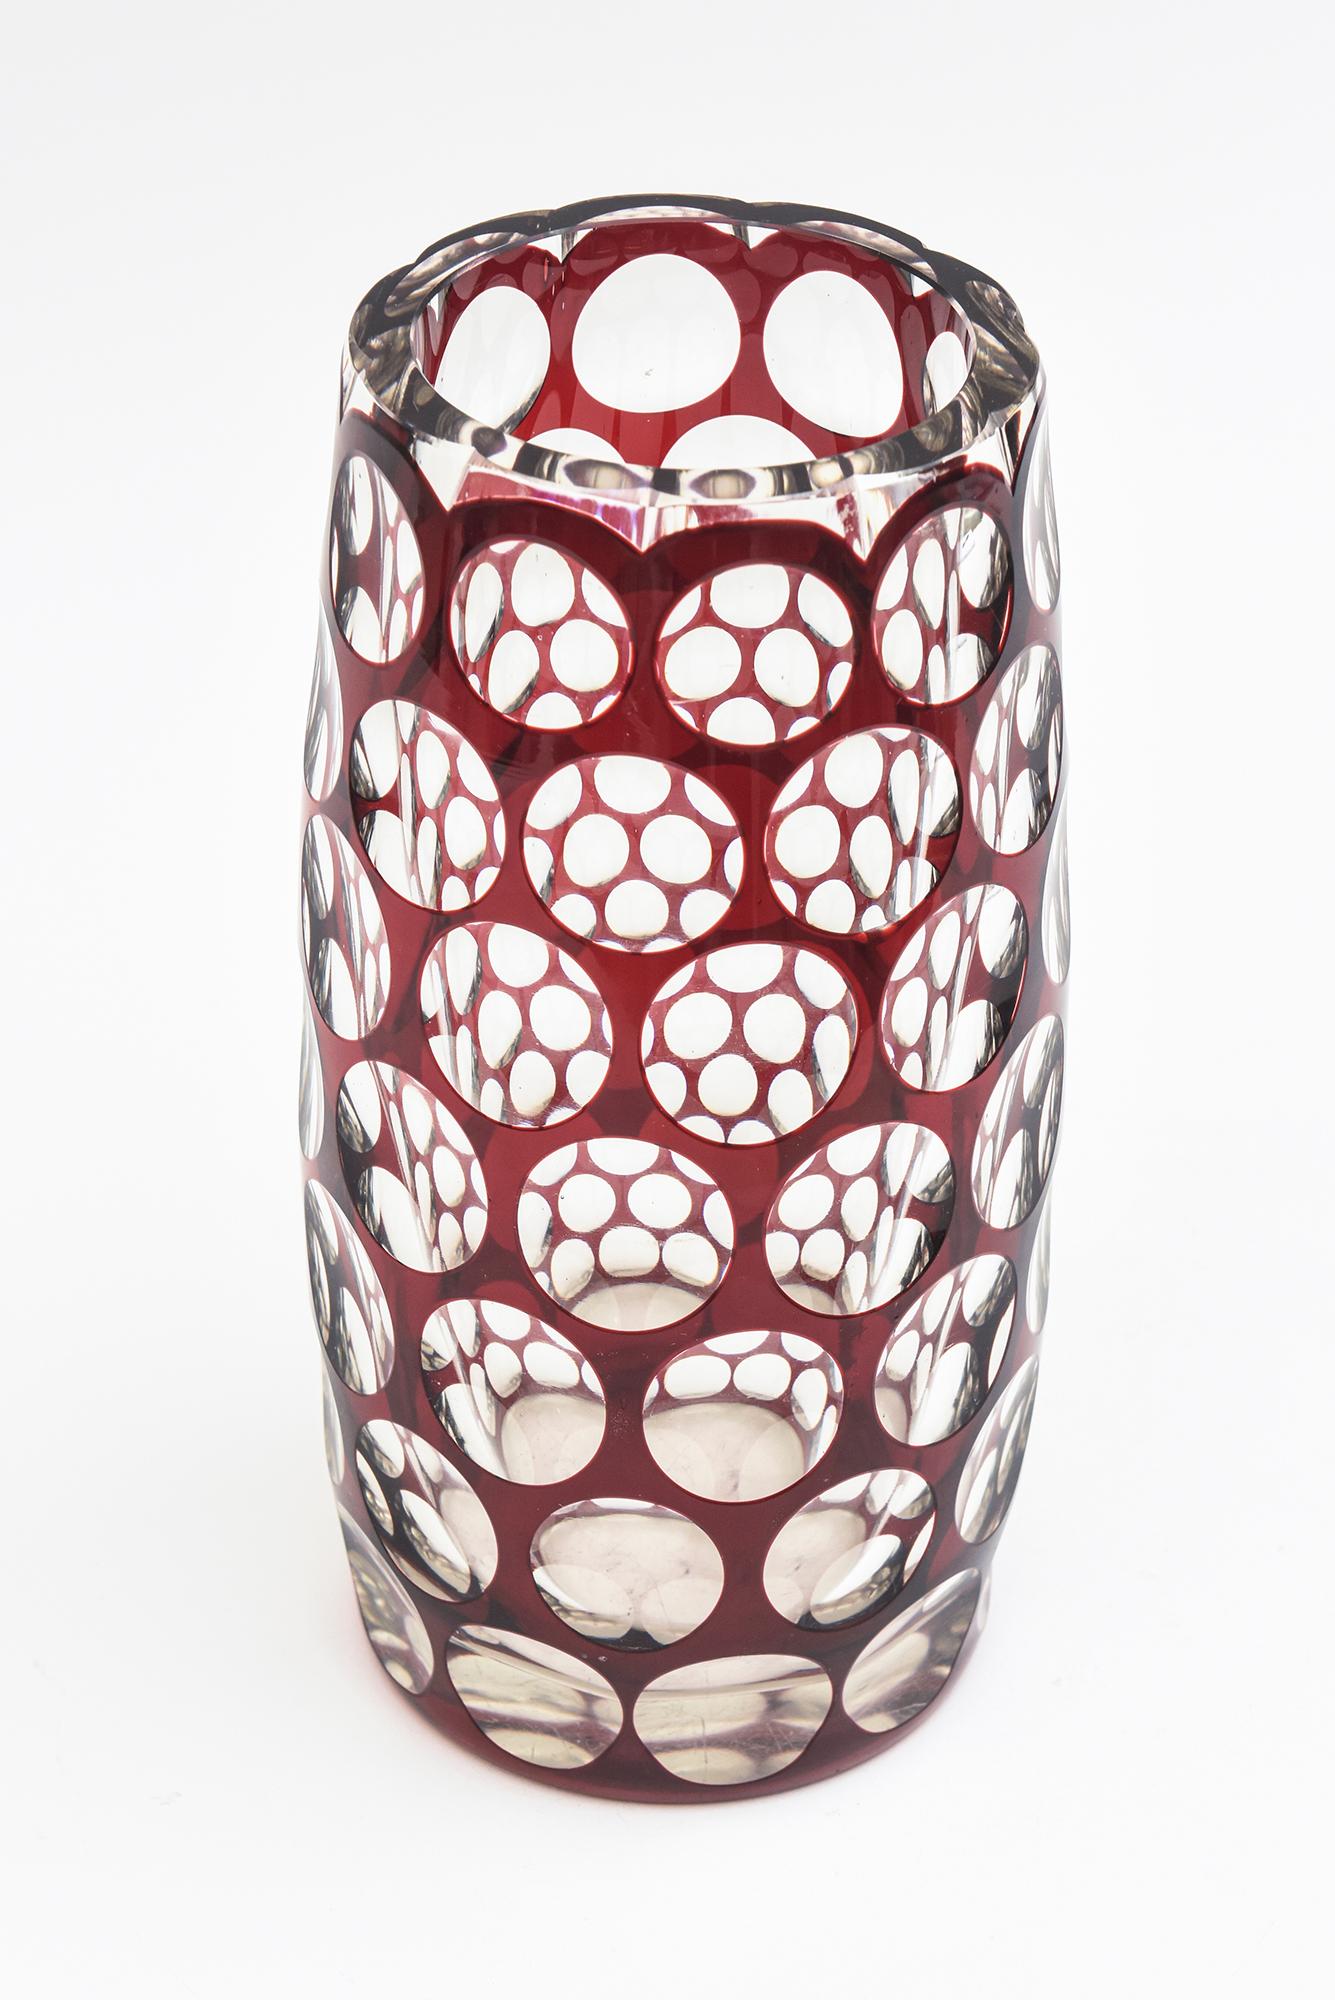 This stunning vintage burgundy red and clear cut glass vase has a honeycomb pattern that reflects an optic design. It looks art deco meets mid century modern. The rim is flat cut polished and the opening at the top is 3